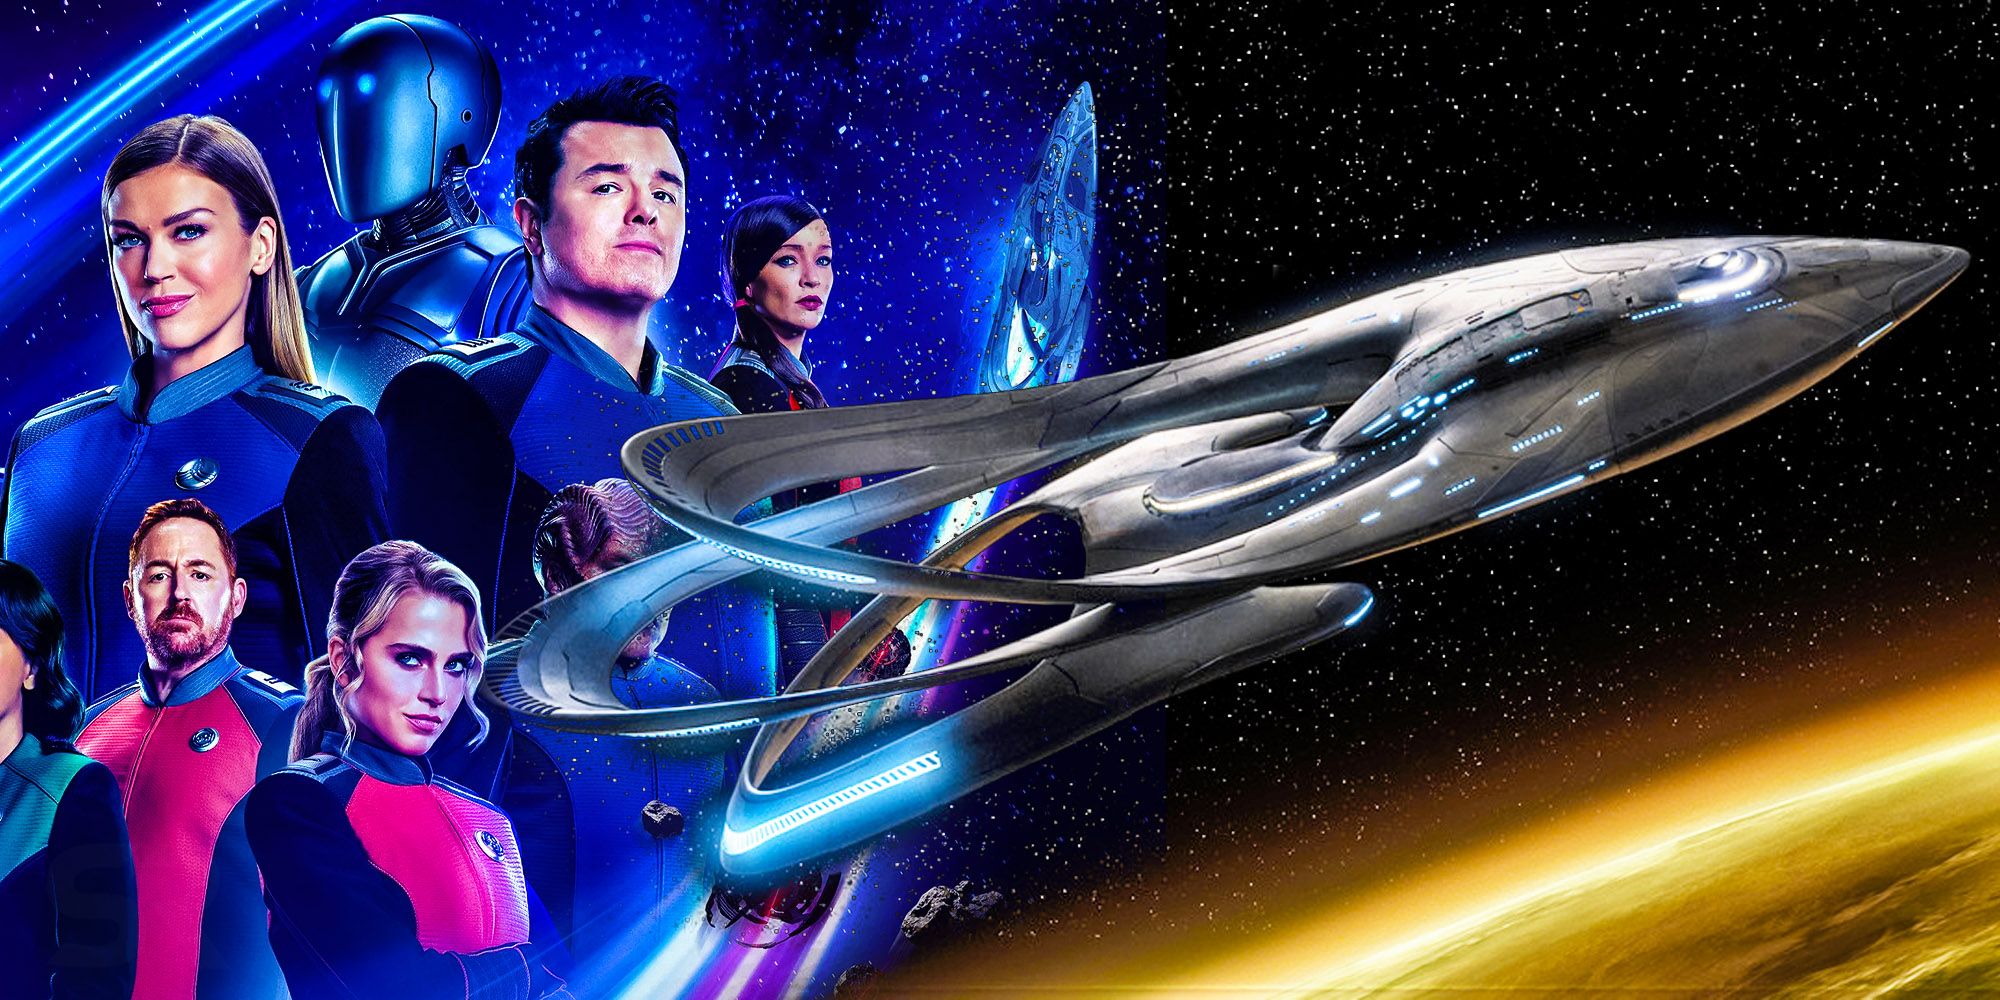 Why The Orville Season 3 Was Missing An Episode (But You Can Read It)